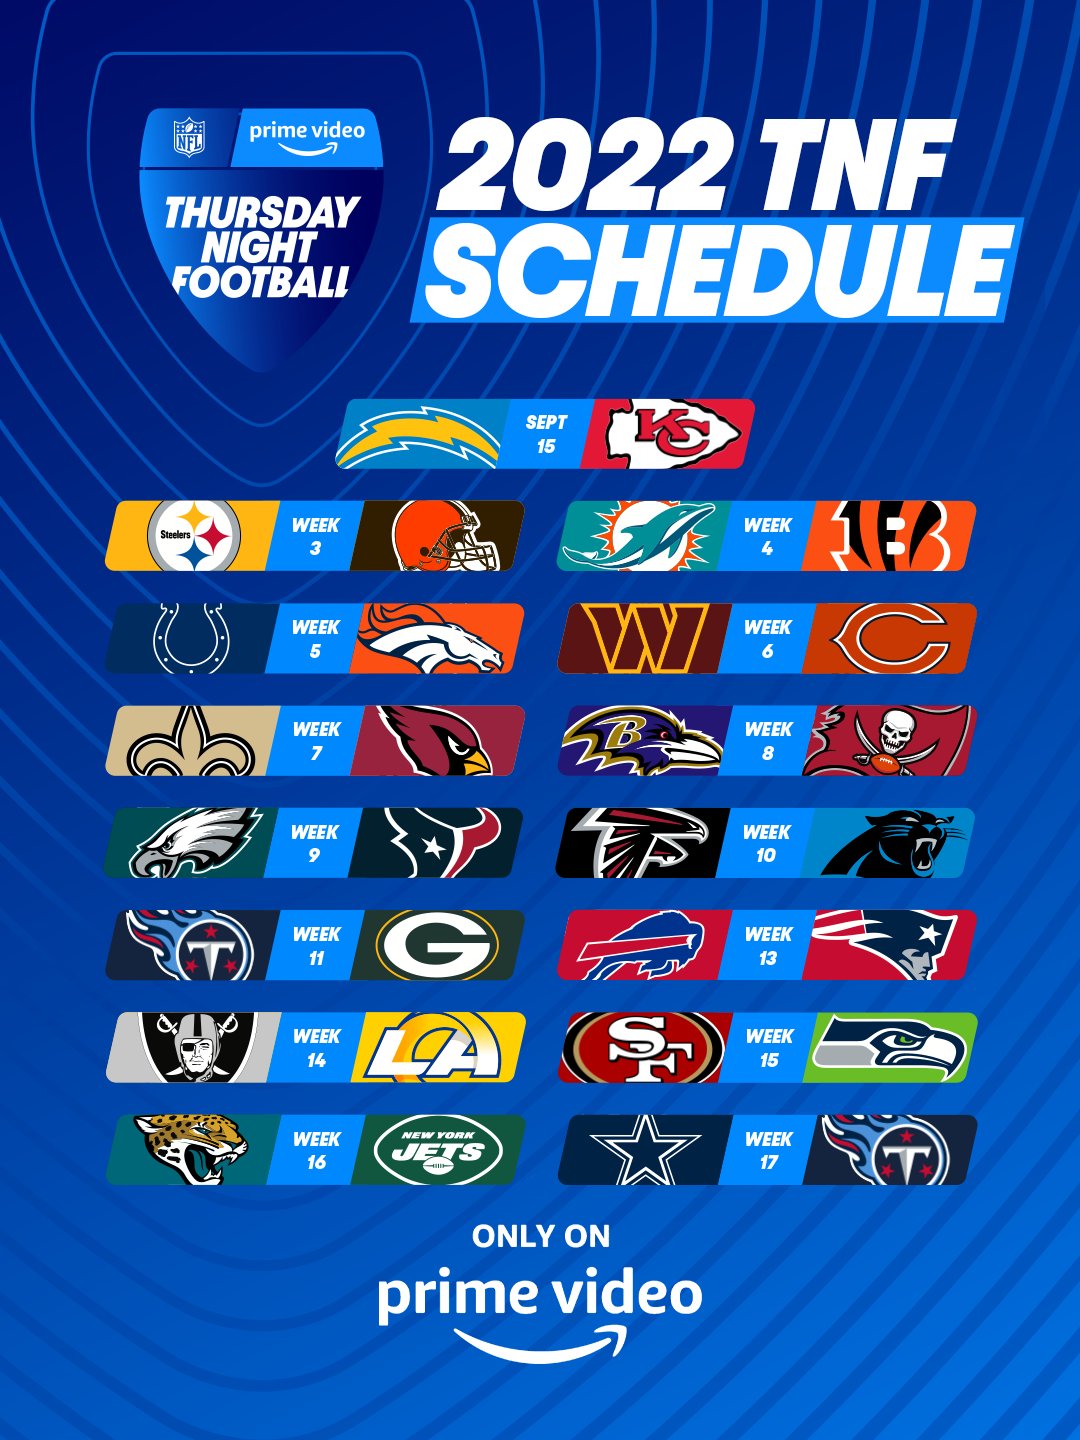 Every Thursday Night Football game on the 2023 NFL schedule